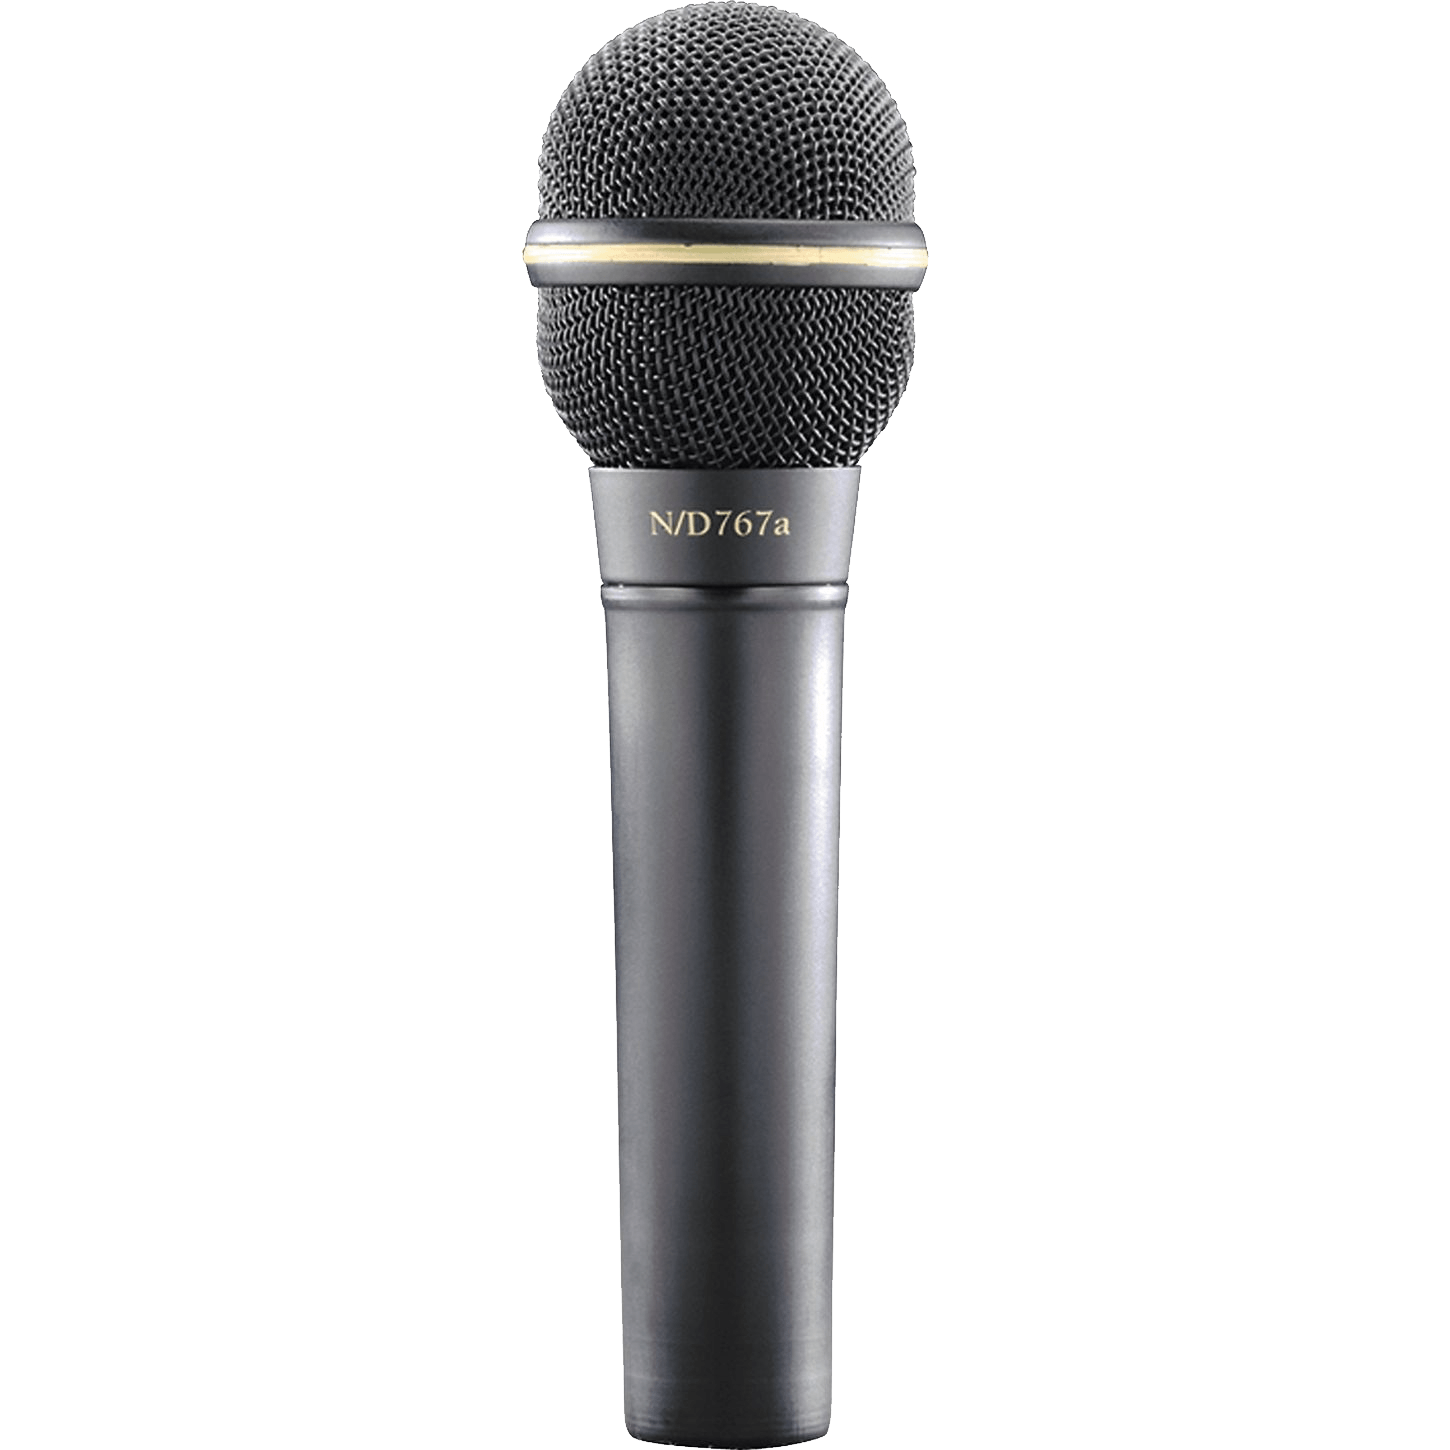 Microphone Png Image PNG Image